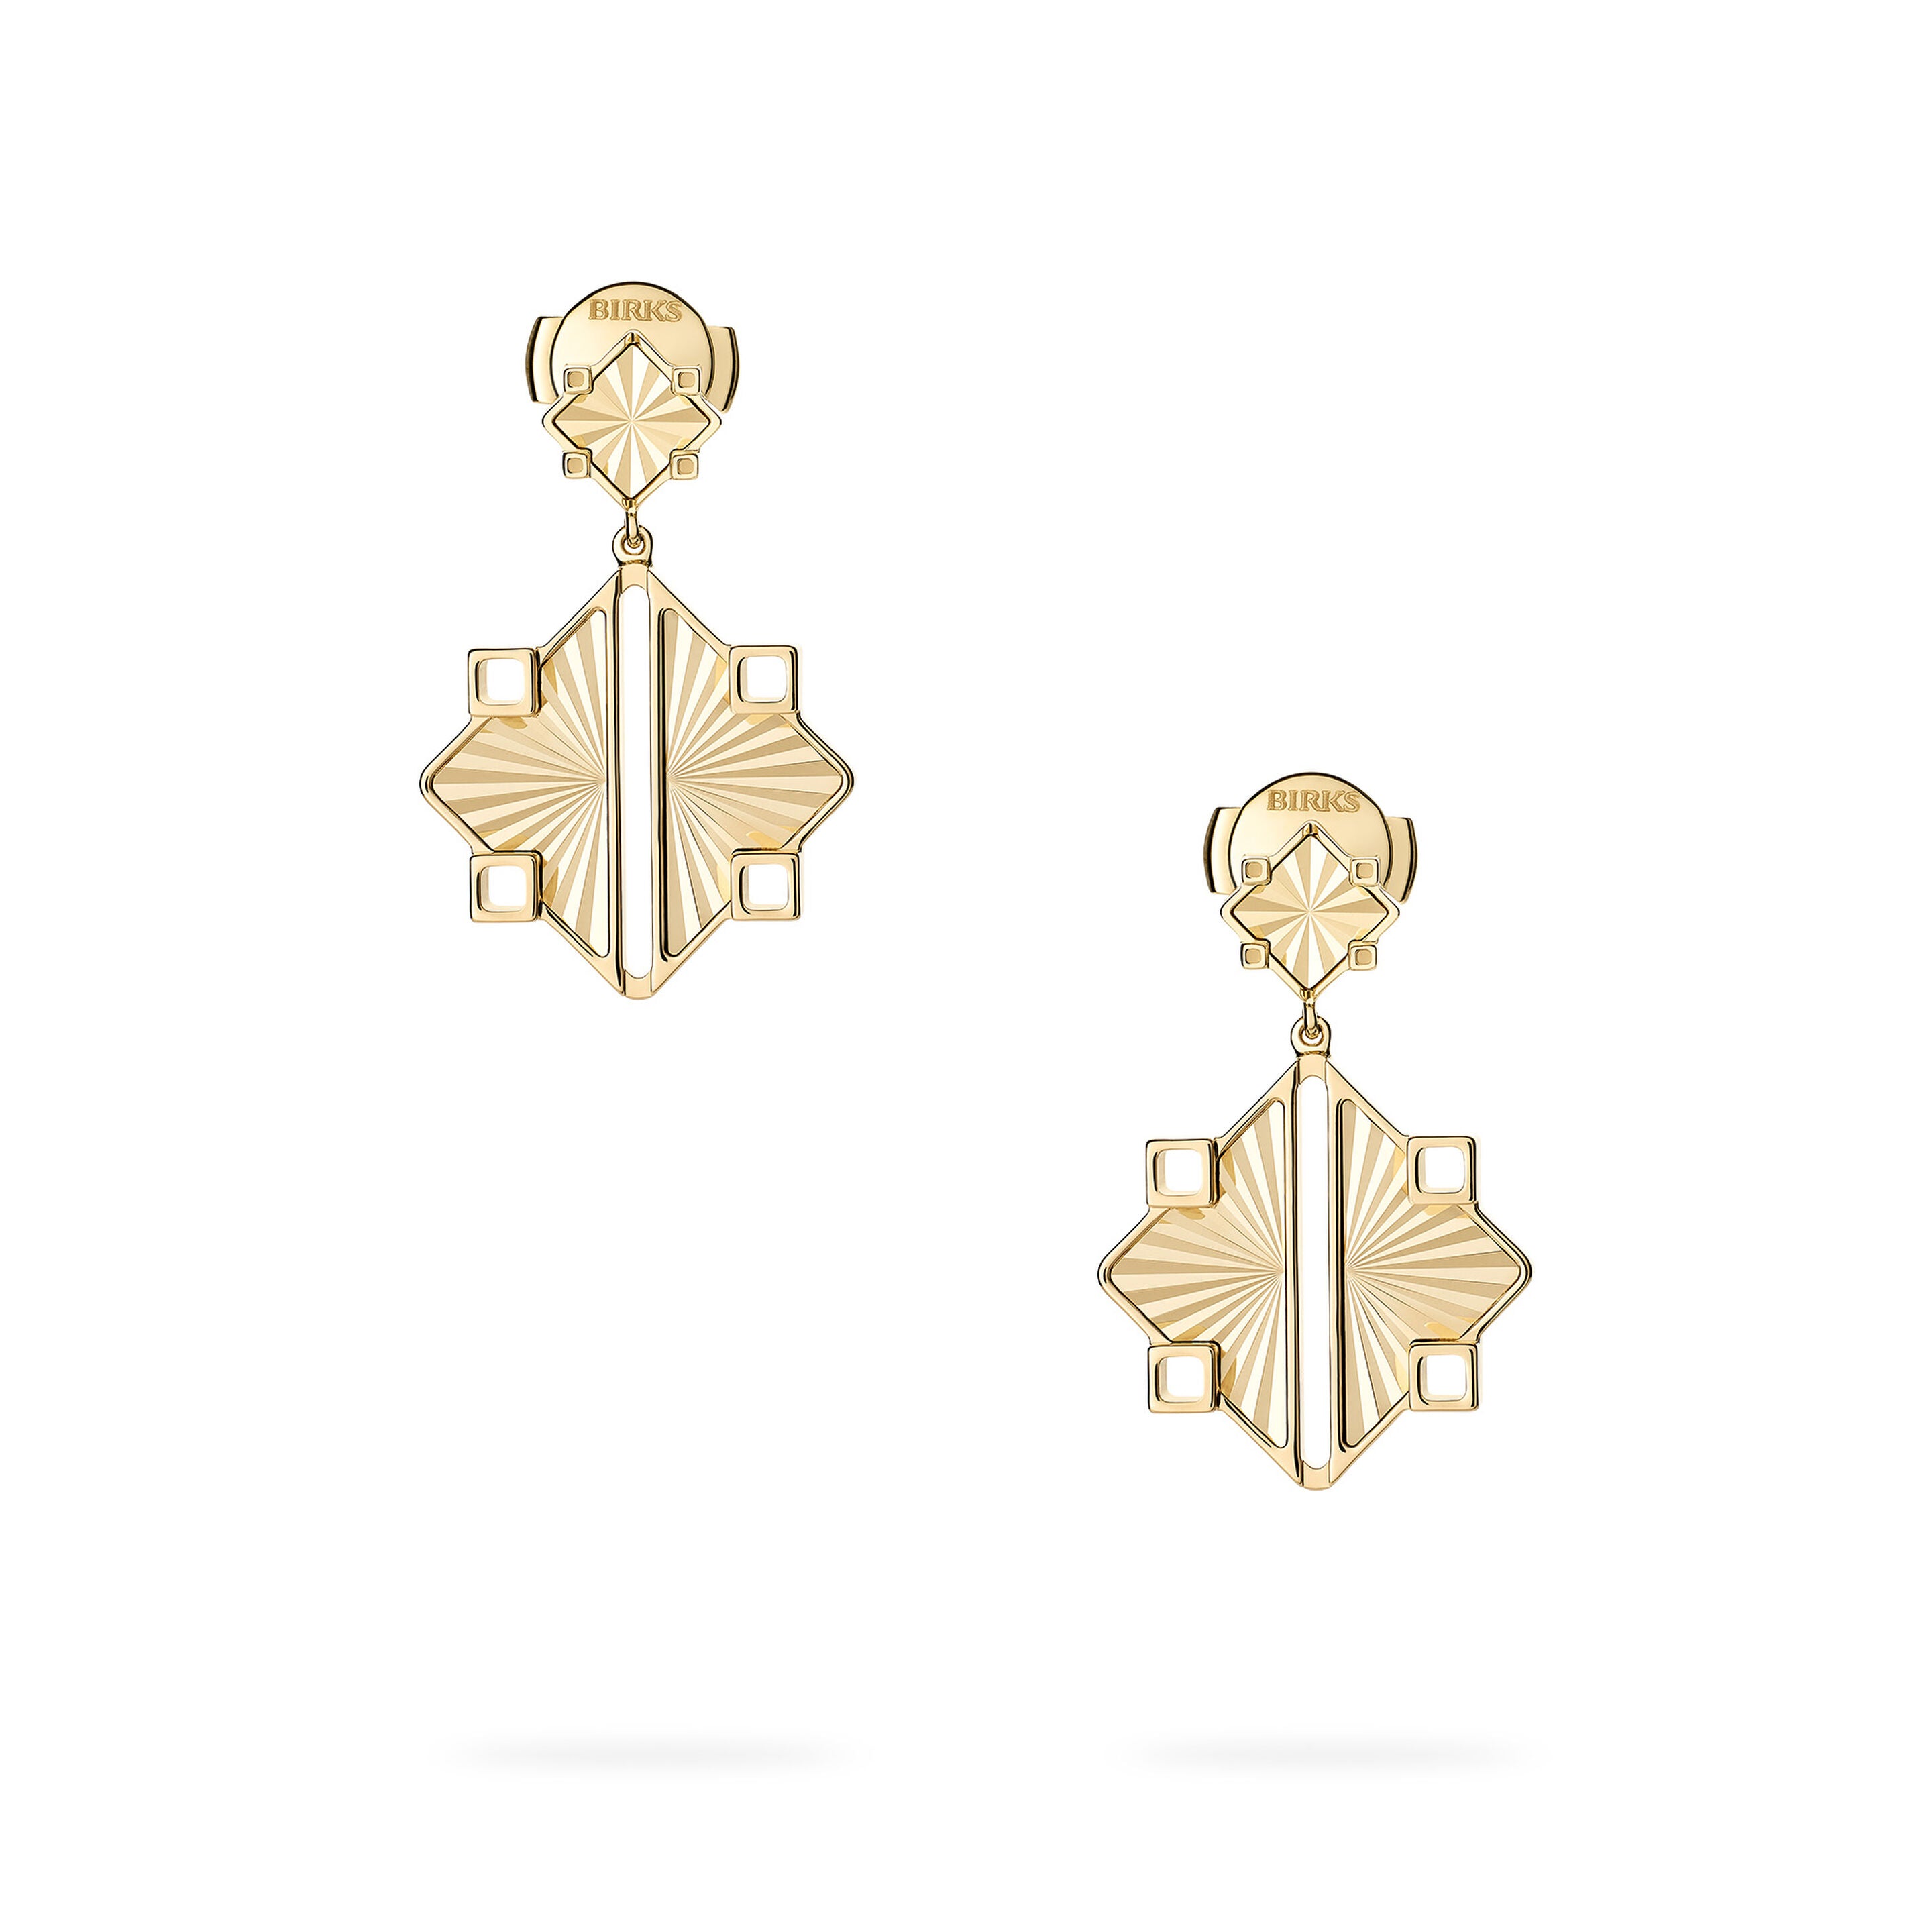 Muse Guilloché Yellow Gold Drop Earrings, Large (852494)